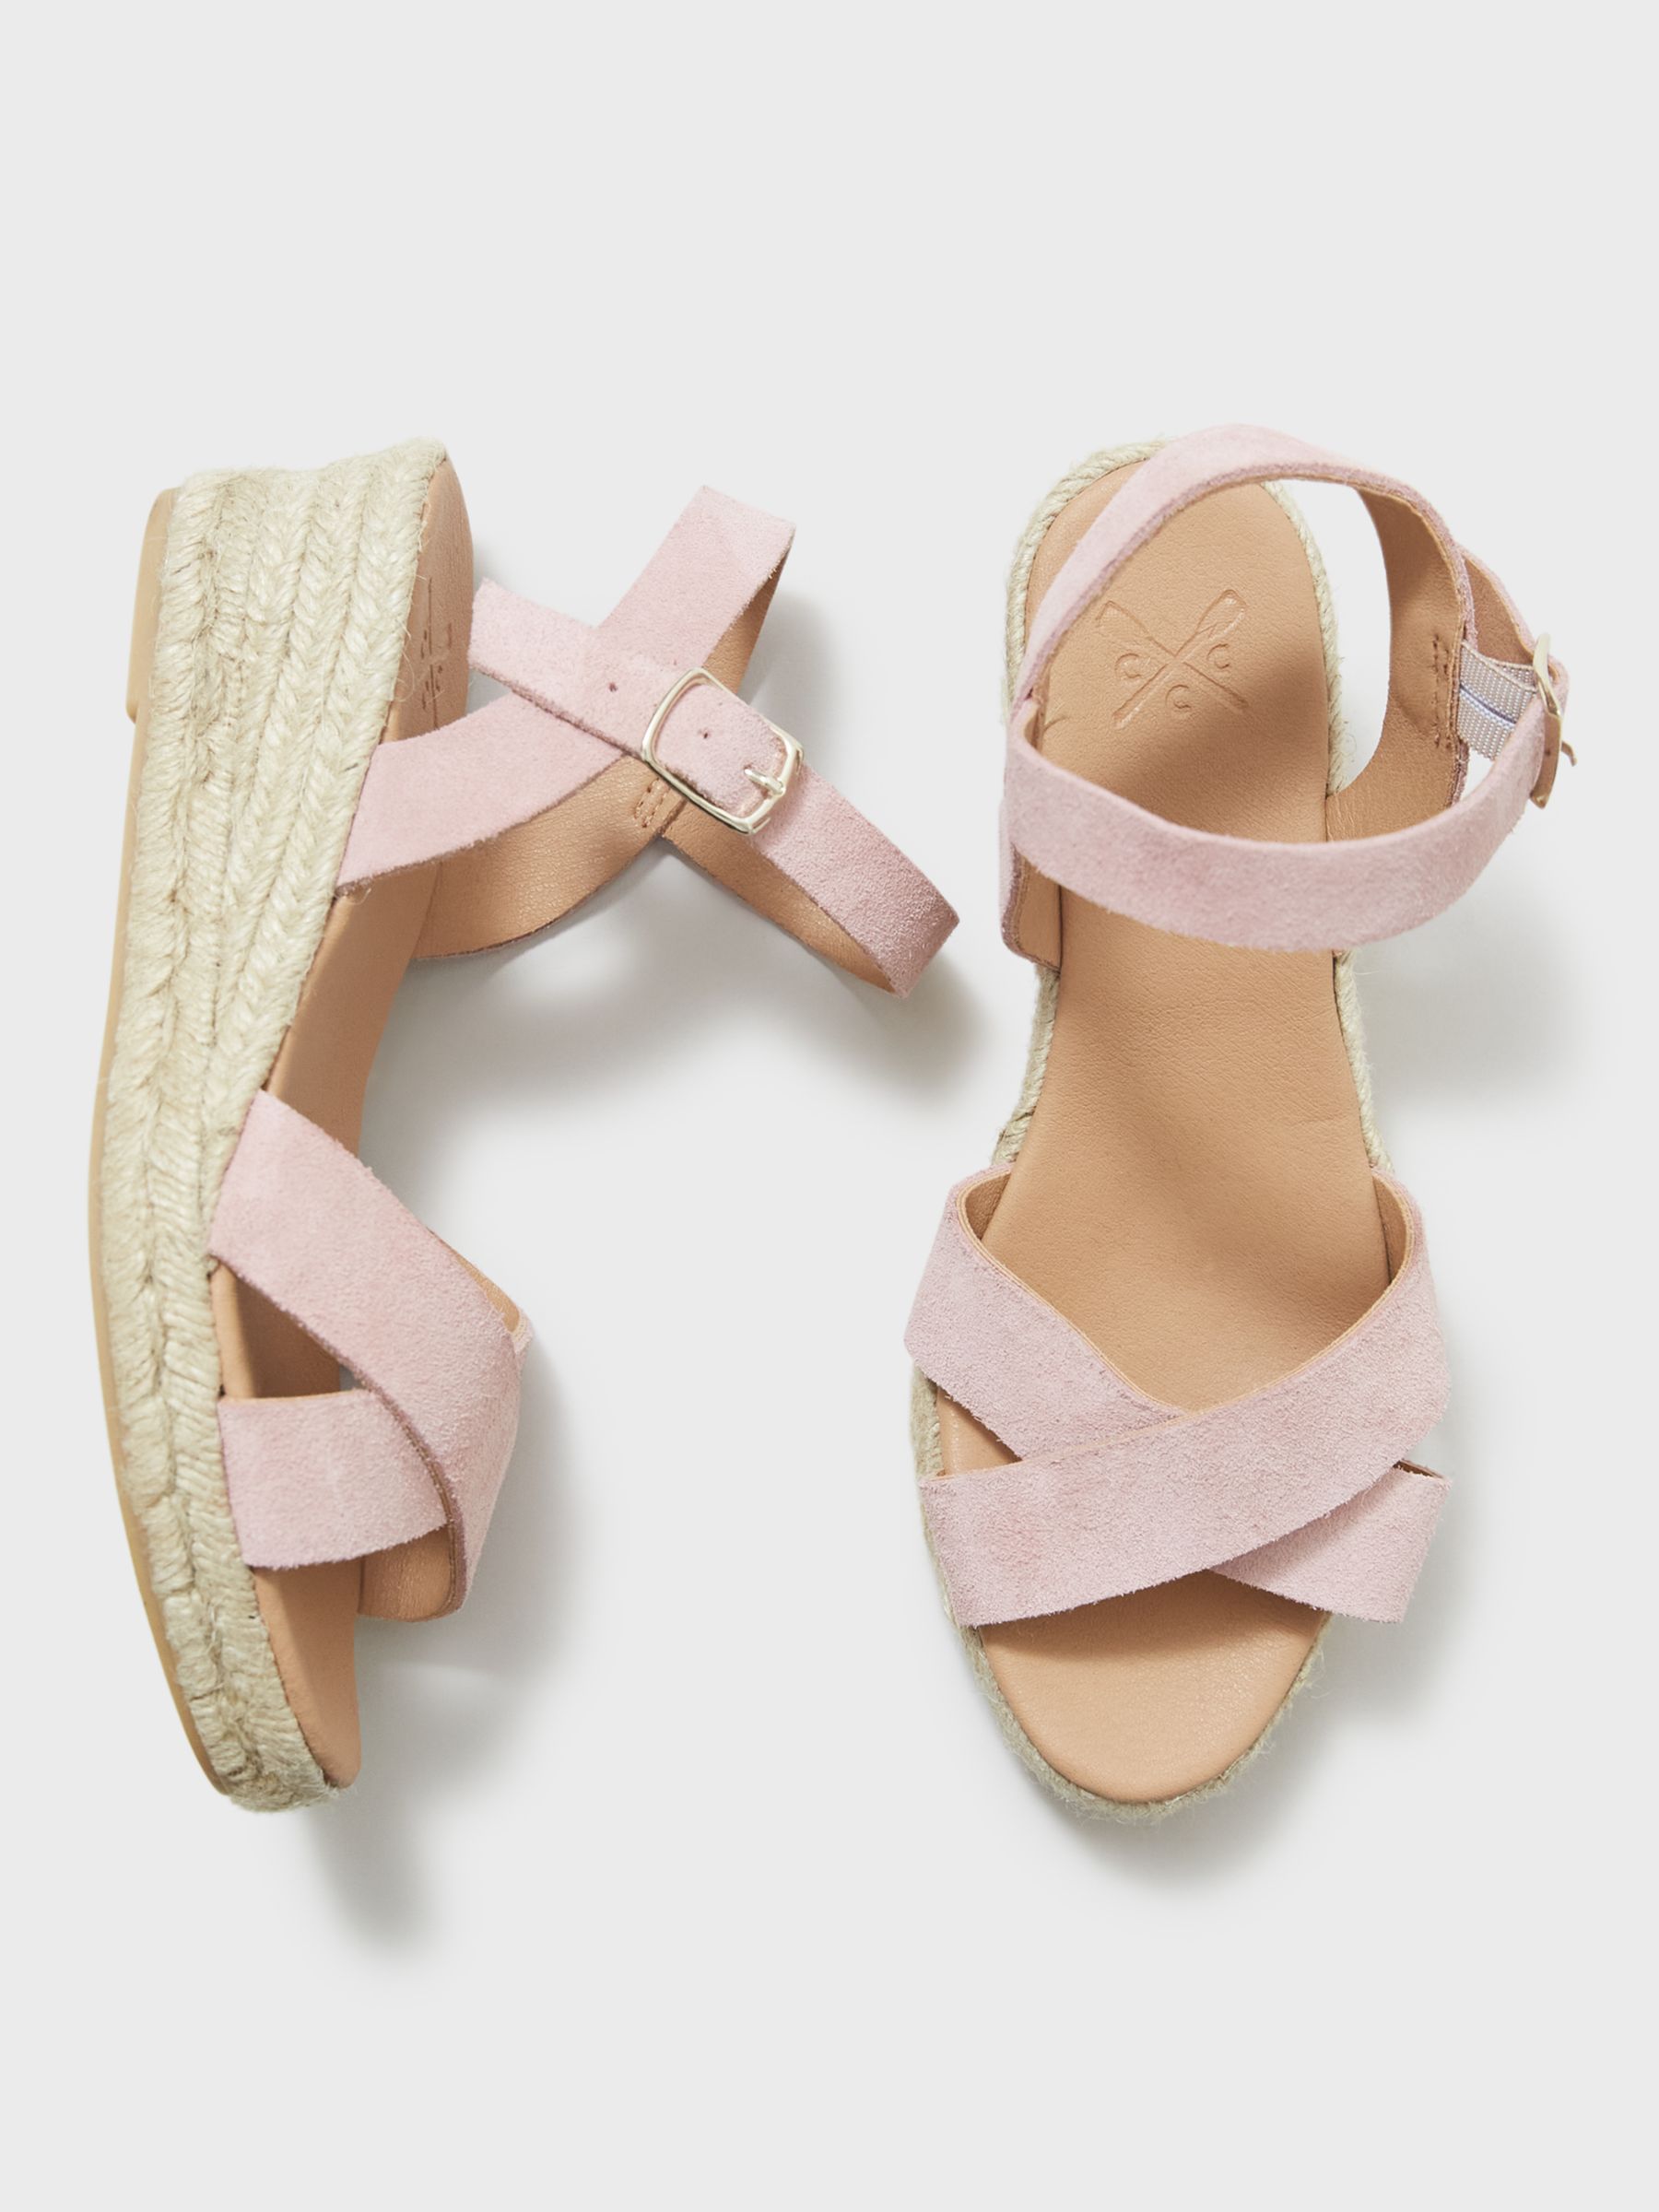 Crew Clothing Lexi Suede Wedge Sandals, Peach Pink at John Lewis & Partners